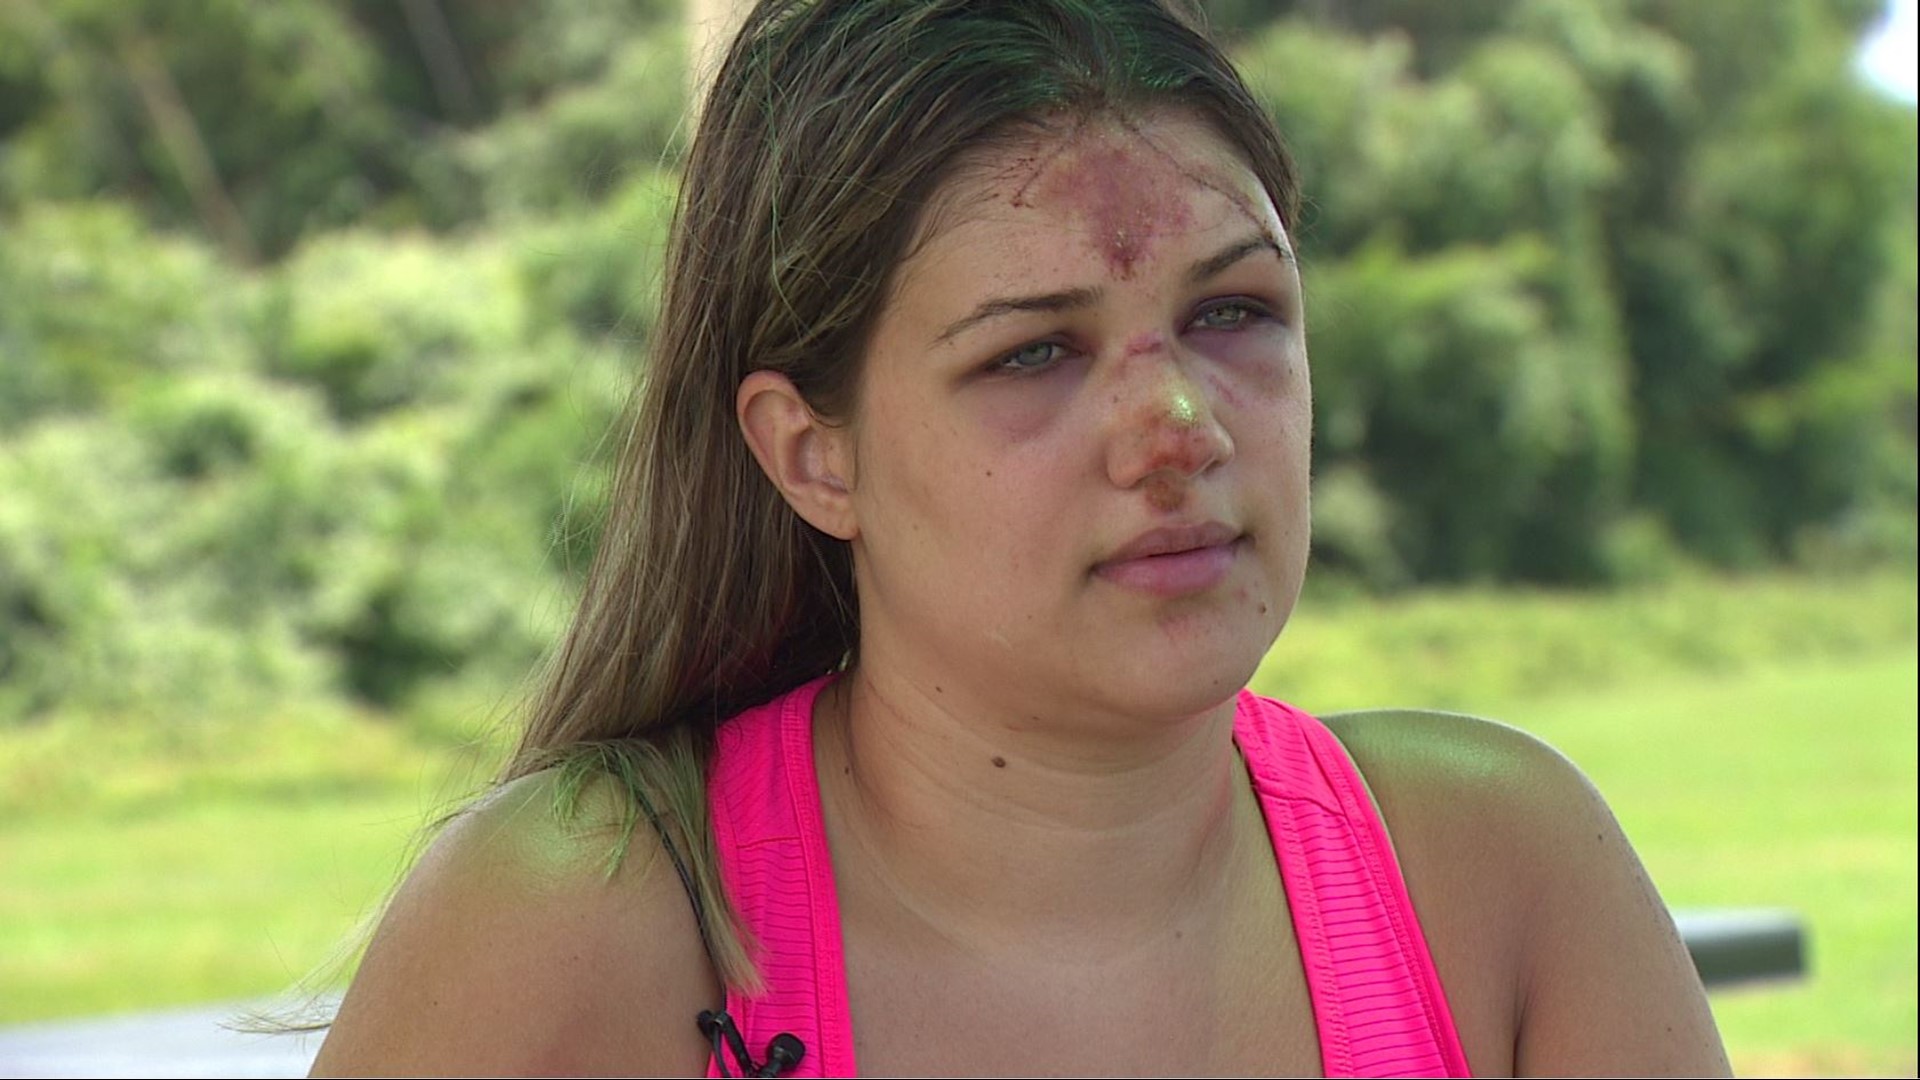 A woman says she was brutally attacked by a group of people during a weekend tubing trip near New Braunfels.